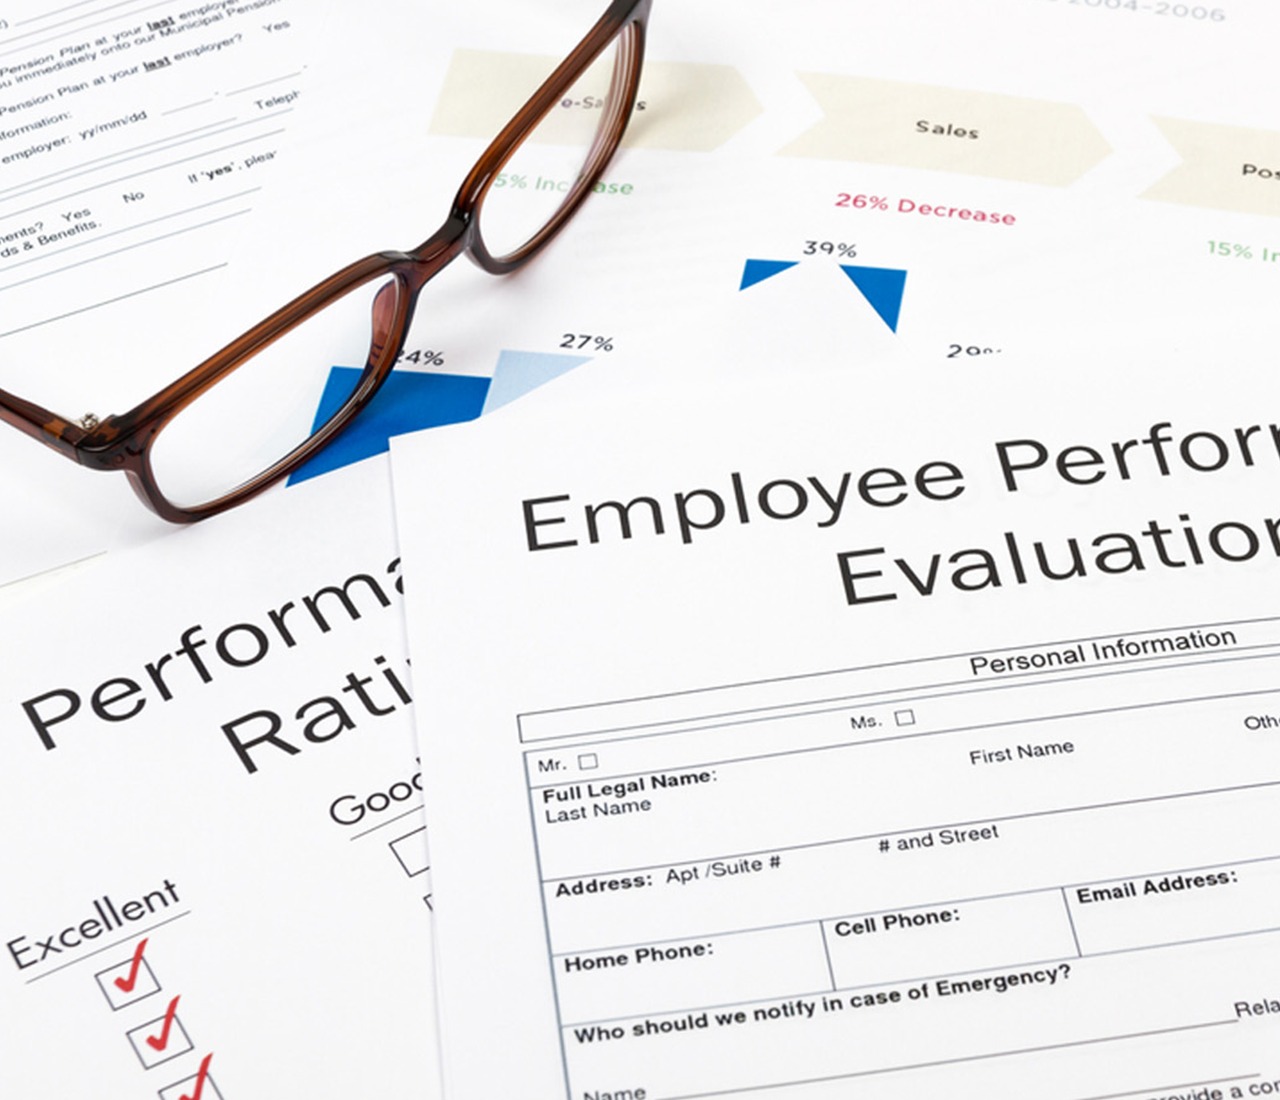 Comparative analysis of company performance evaluation methods